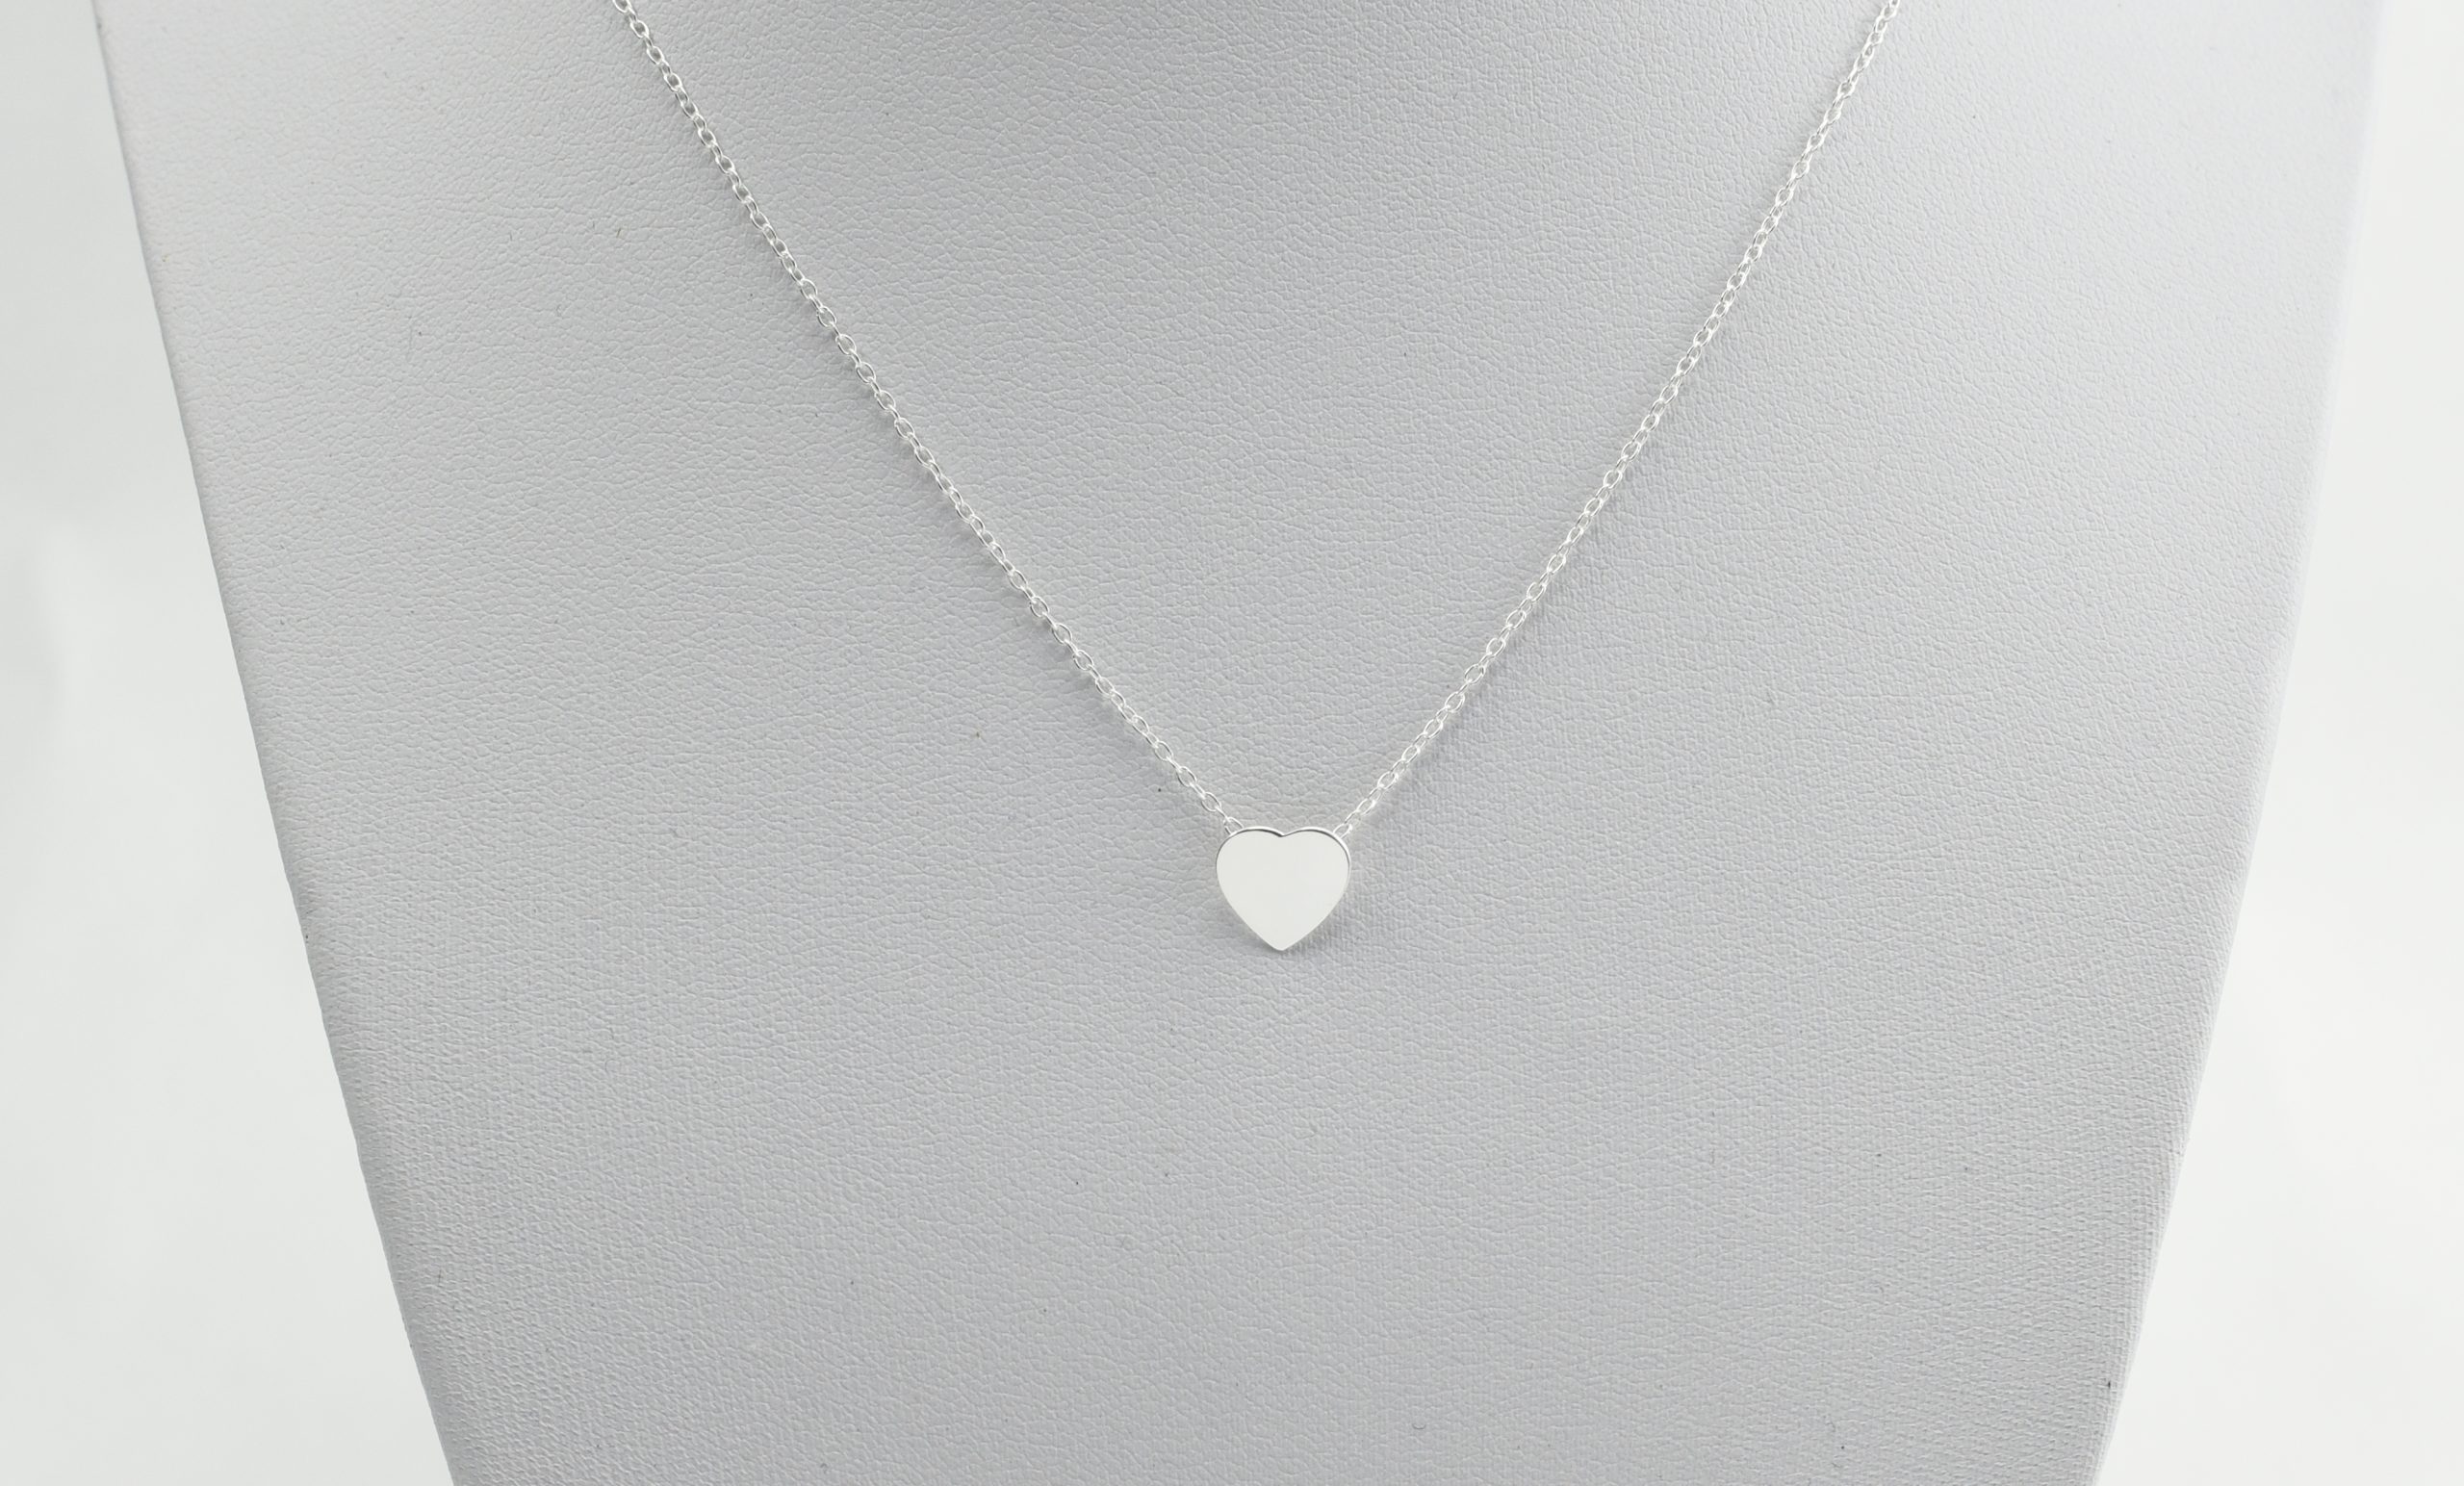 Buy Women's 925 Sterling Silver Twisted Heart with Stone Pendant Necklace